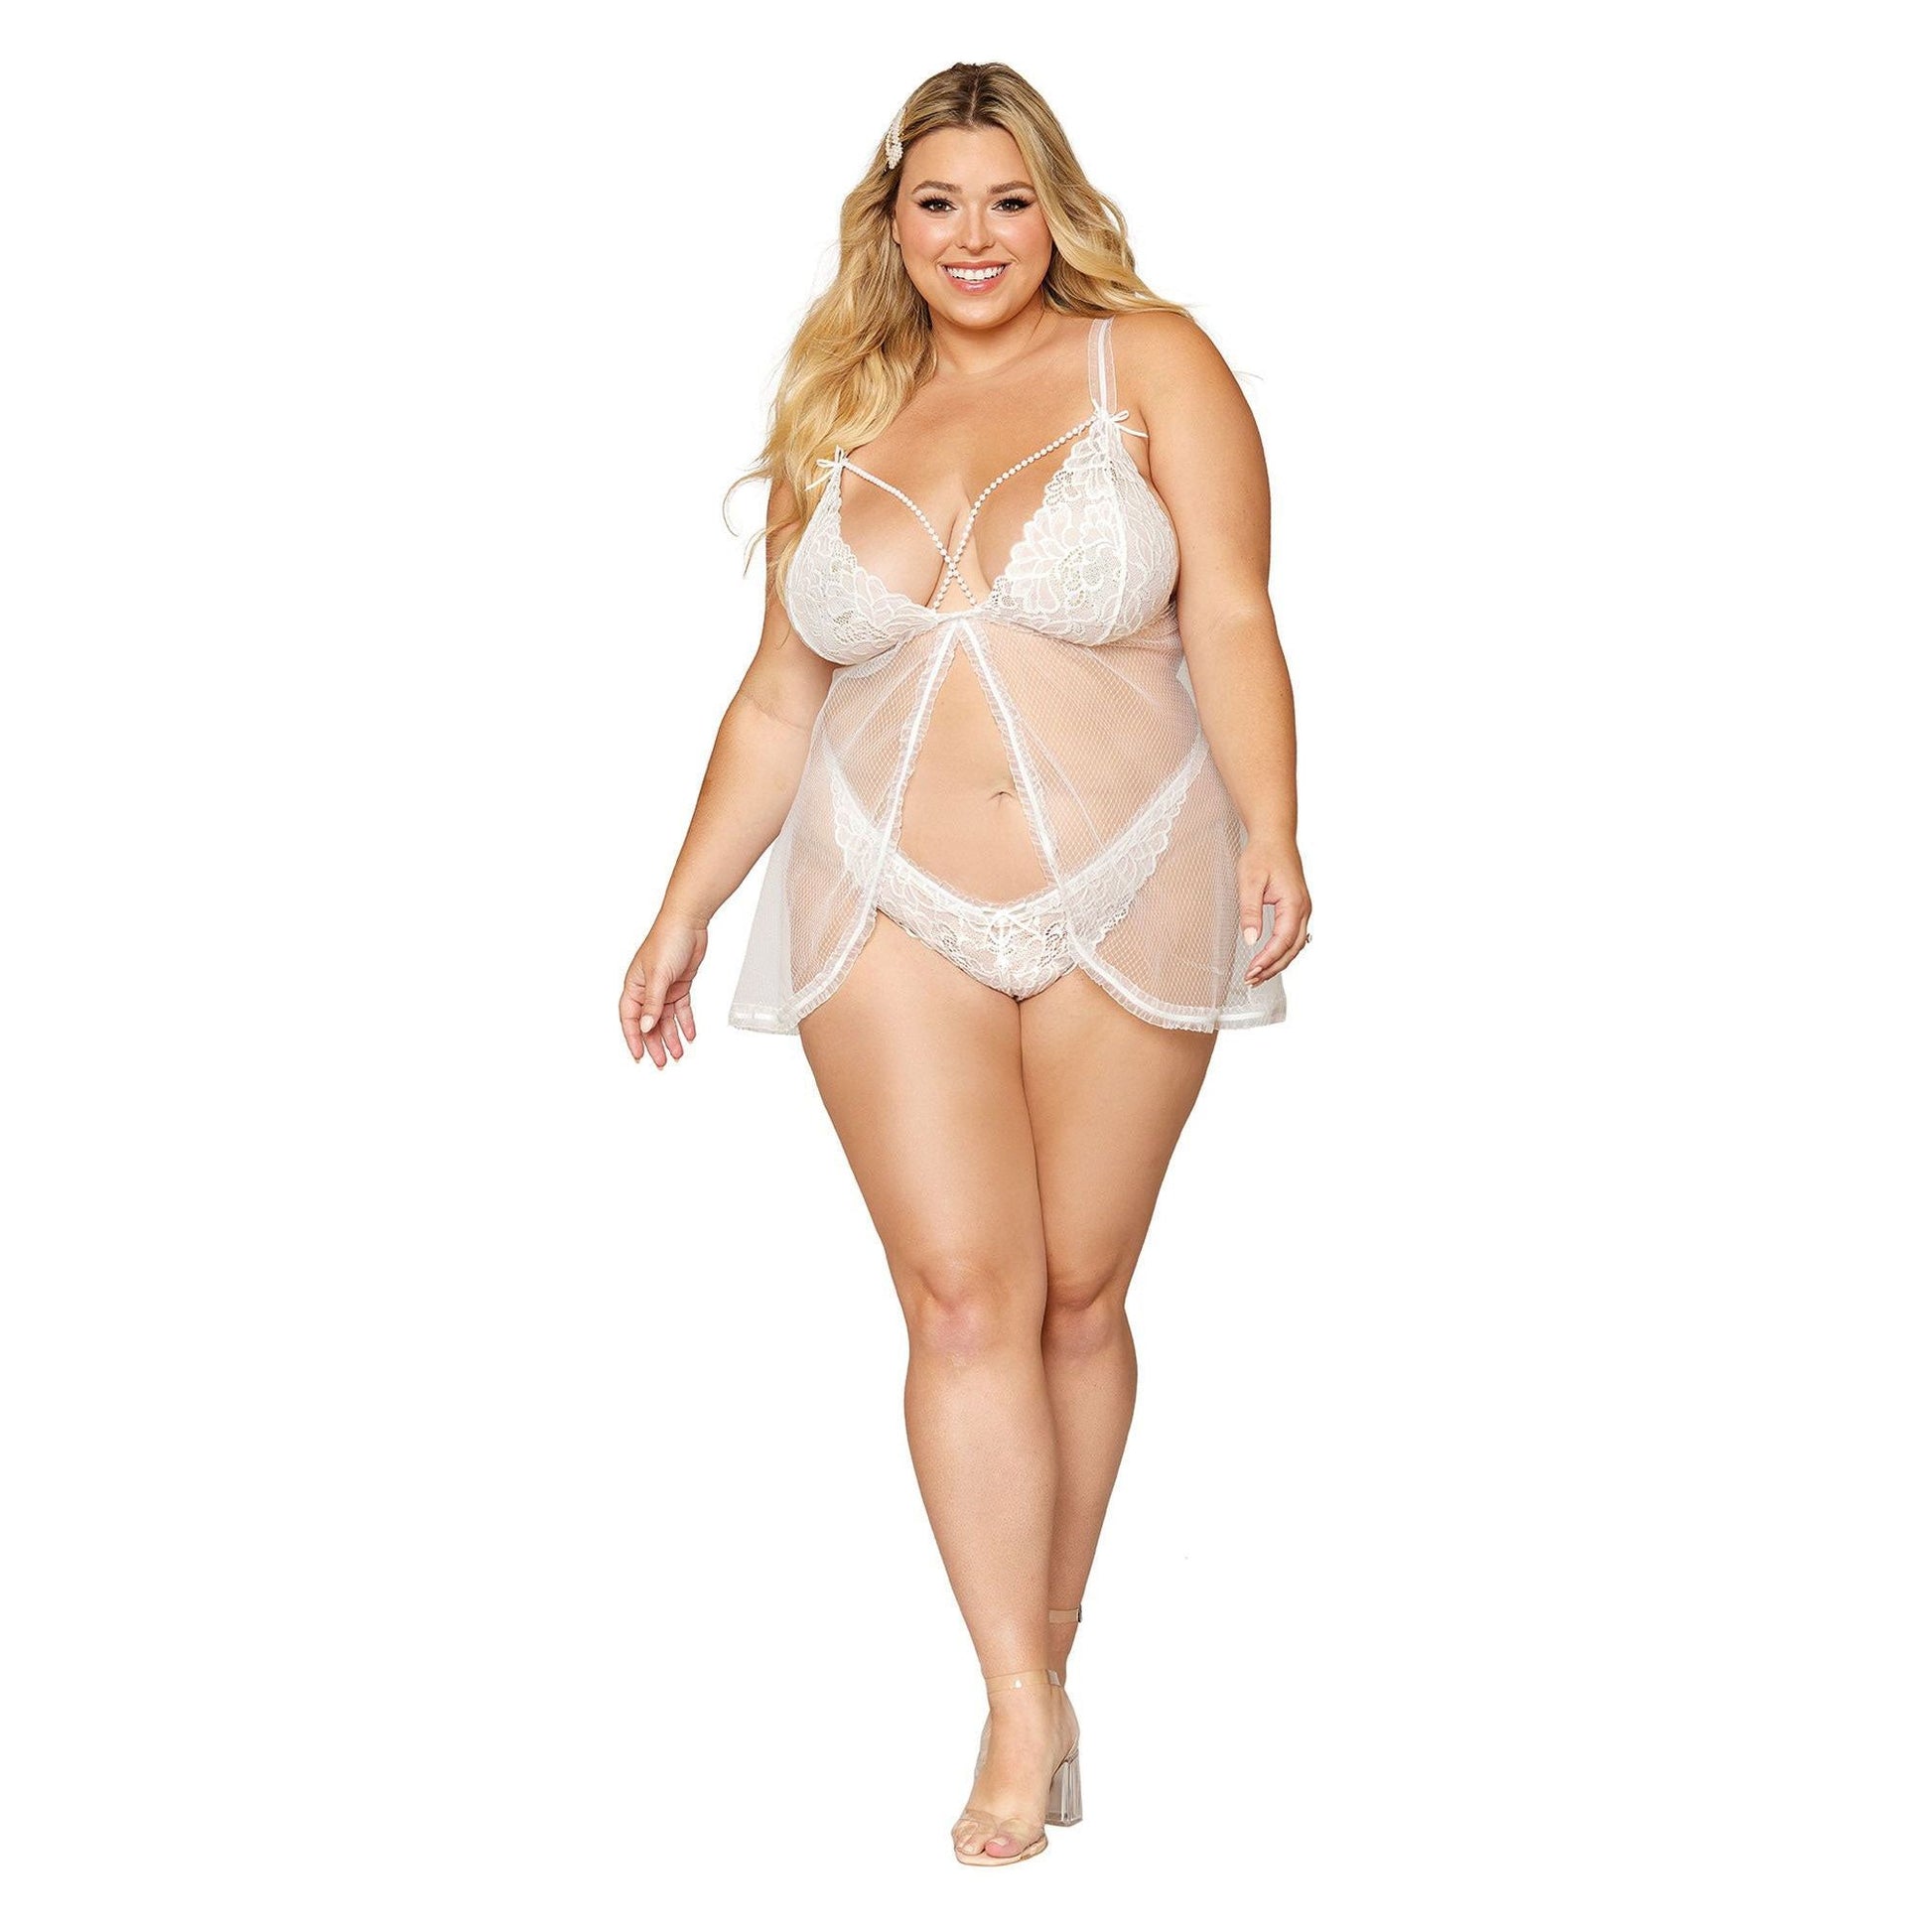 Babydoll and Pearl G-String - Queen Size - White DG-12834WHTQ